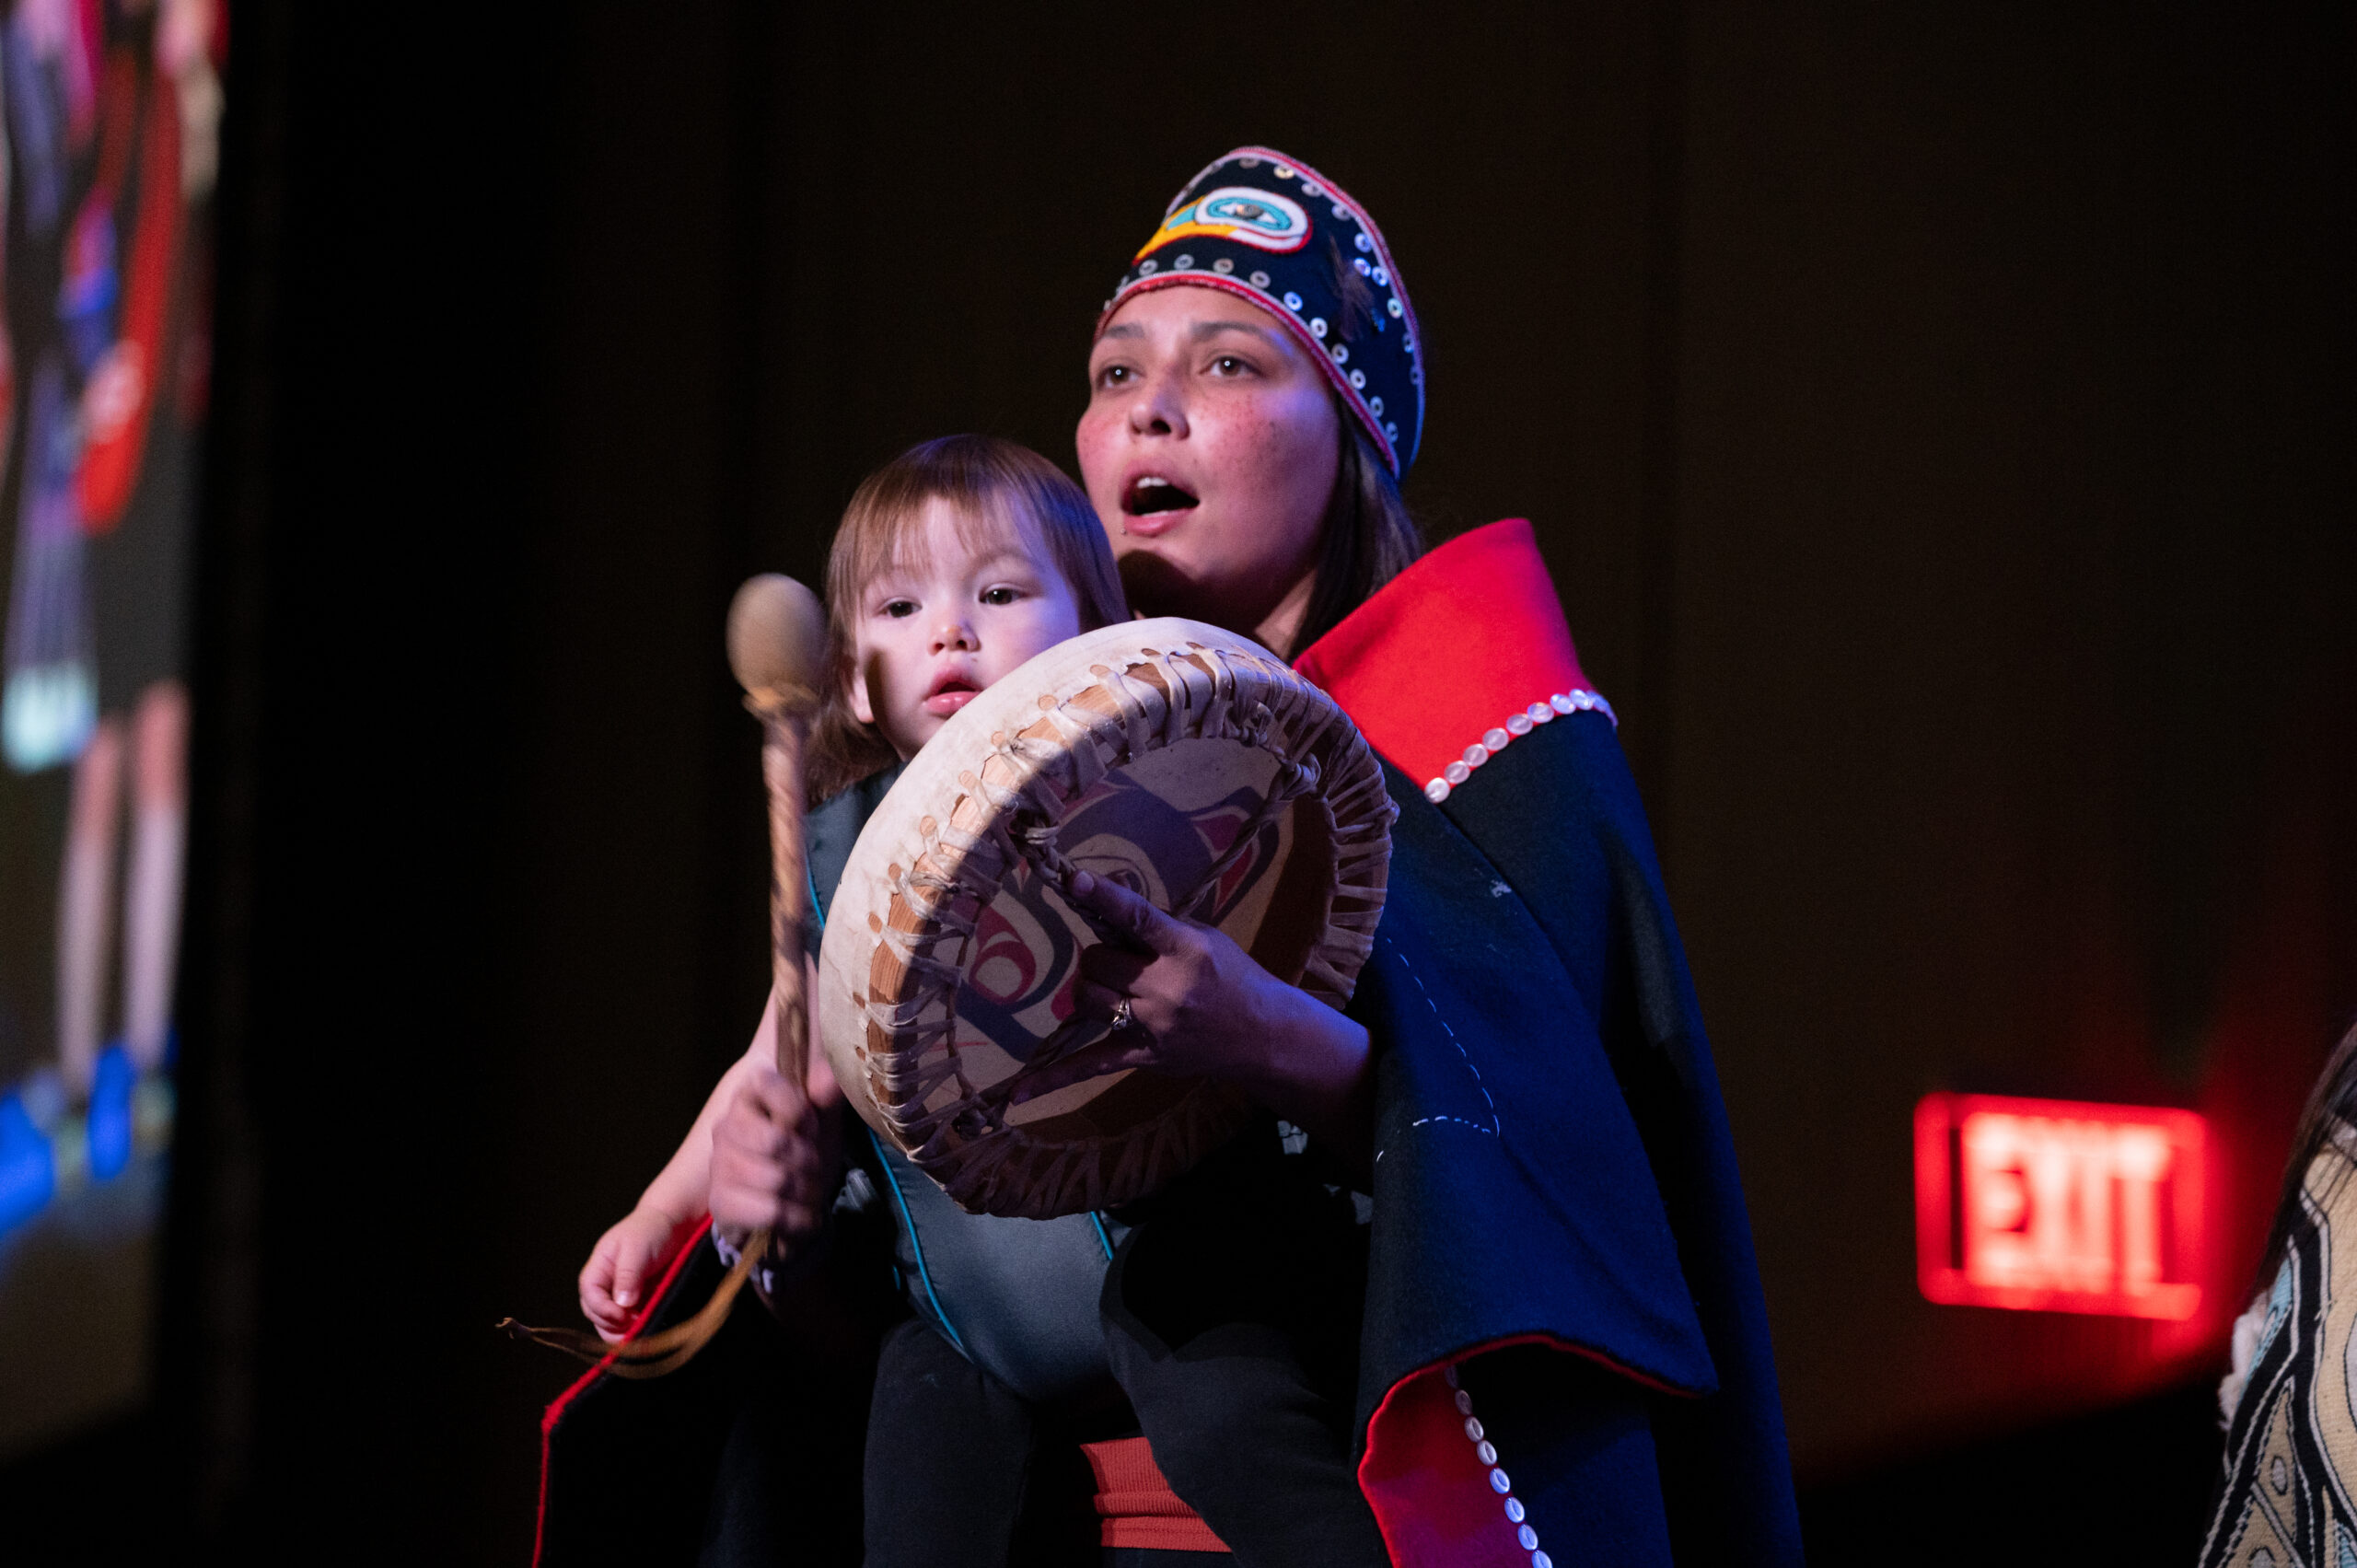 A woman in Alaska Native clothing holds a drum while dancing with her newborn.